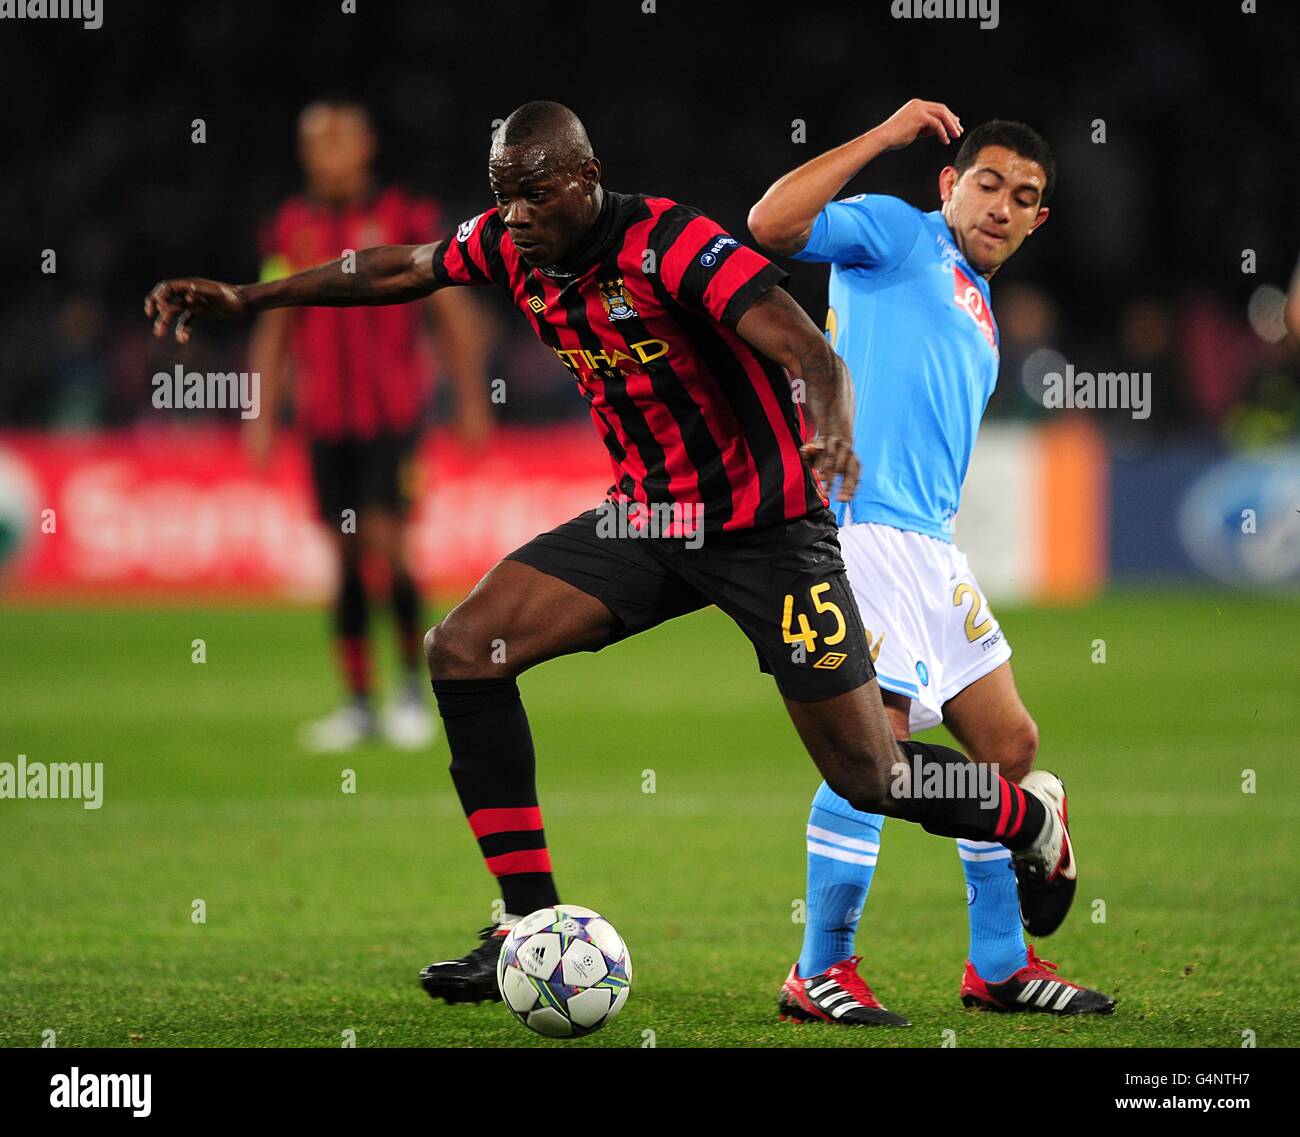 Soccer - UEFA Champions League - Group A - Napoli v Manchester City - Stadio San Paolo. Napoli's Walter Gargano (right) and Manchester City's Mario Balotelli (left) battle for the ball Stock Photo